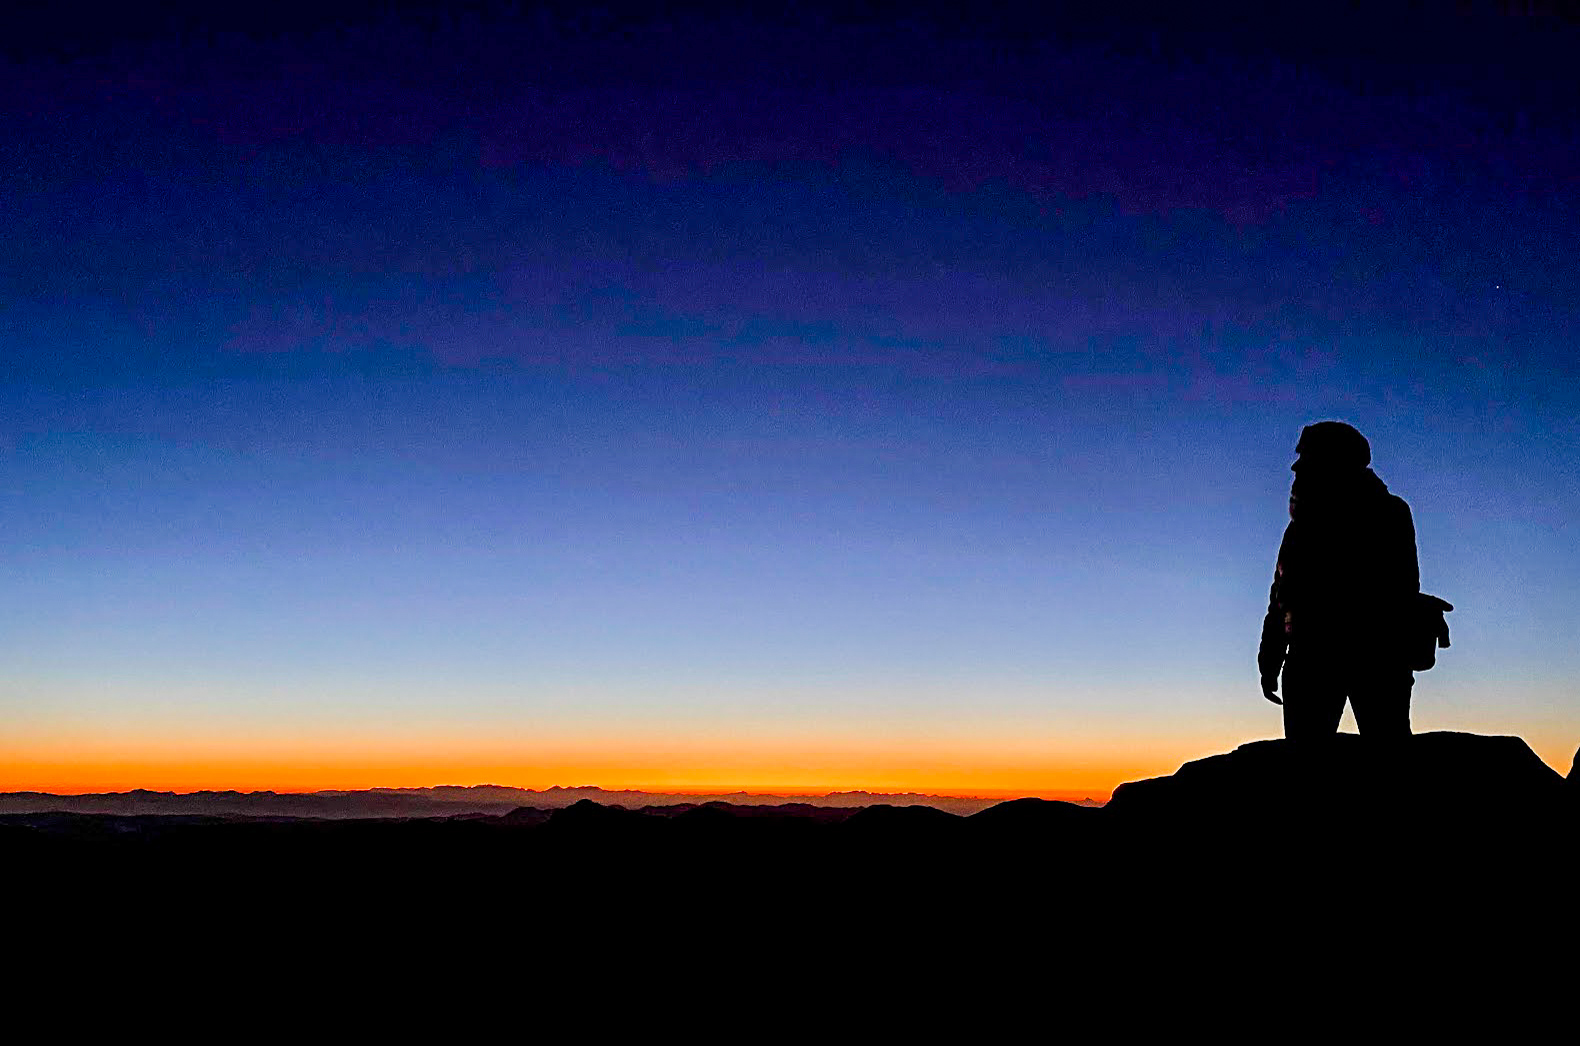 The silhouette of a walker against the sunrise at the summit of Mount Sinai, Egypt